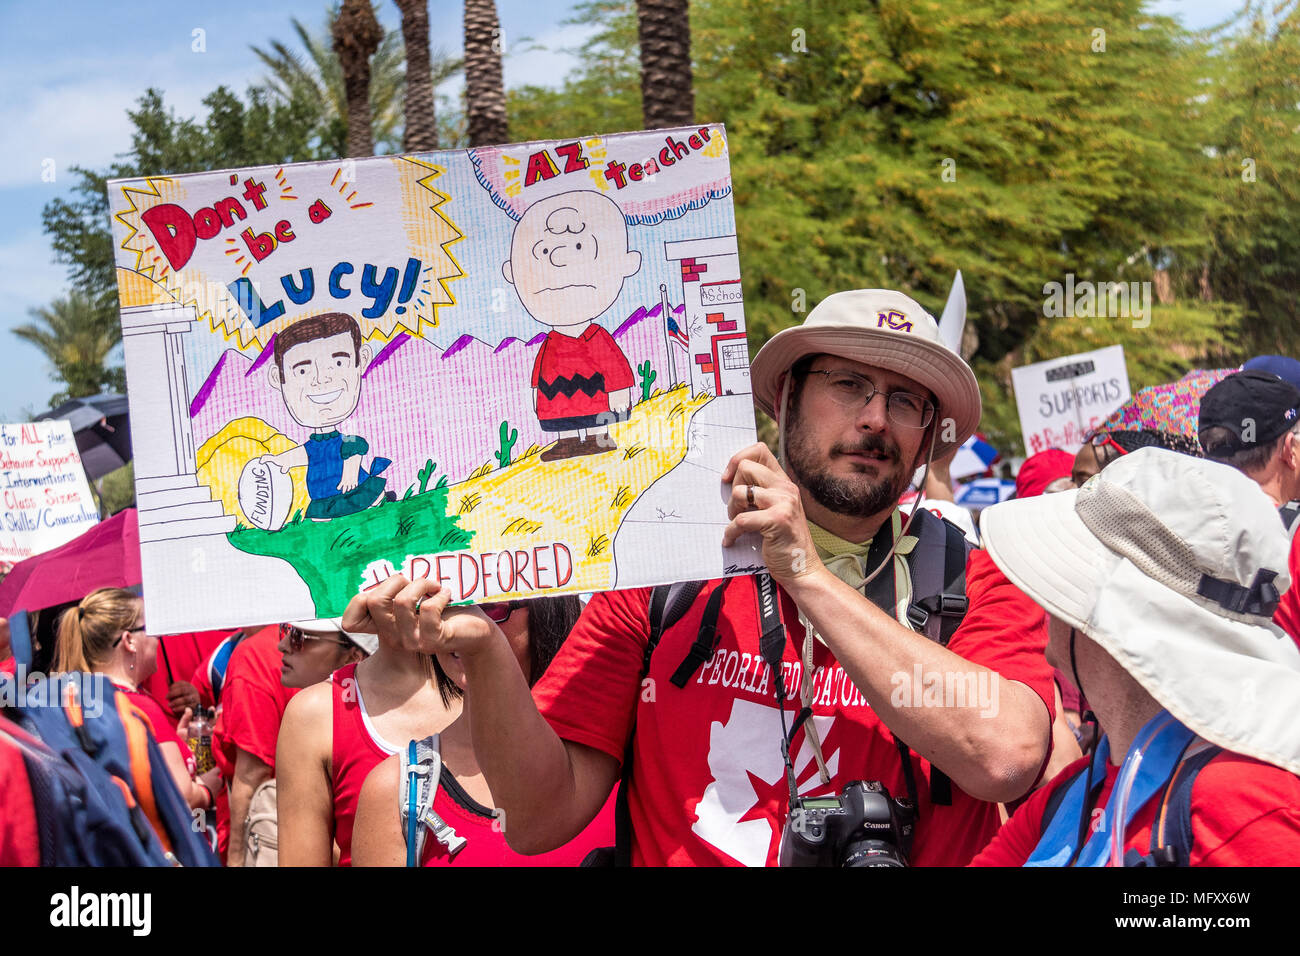 Phoenix, USA, 26 avril 2018, le n° RedForEd - Mars a Lucy. Credit : Michelle Jones - Arizona/Alamy Live News. Banque D'Images